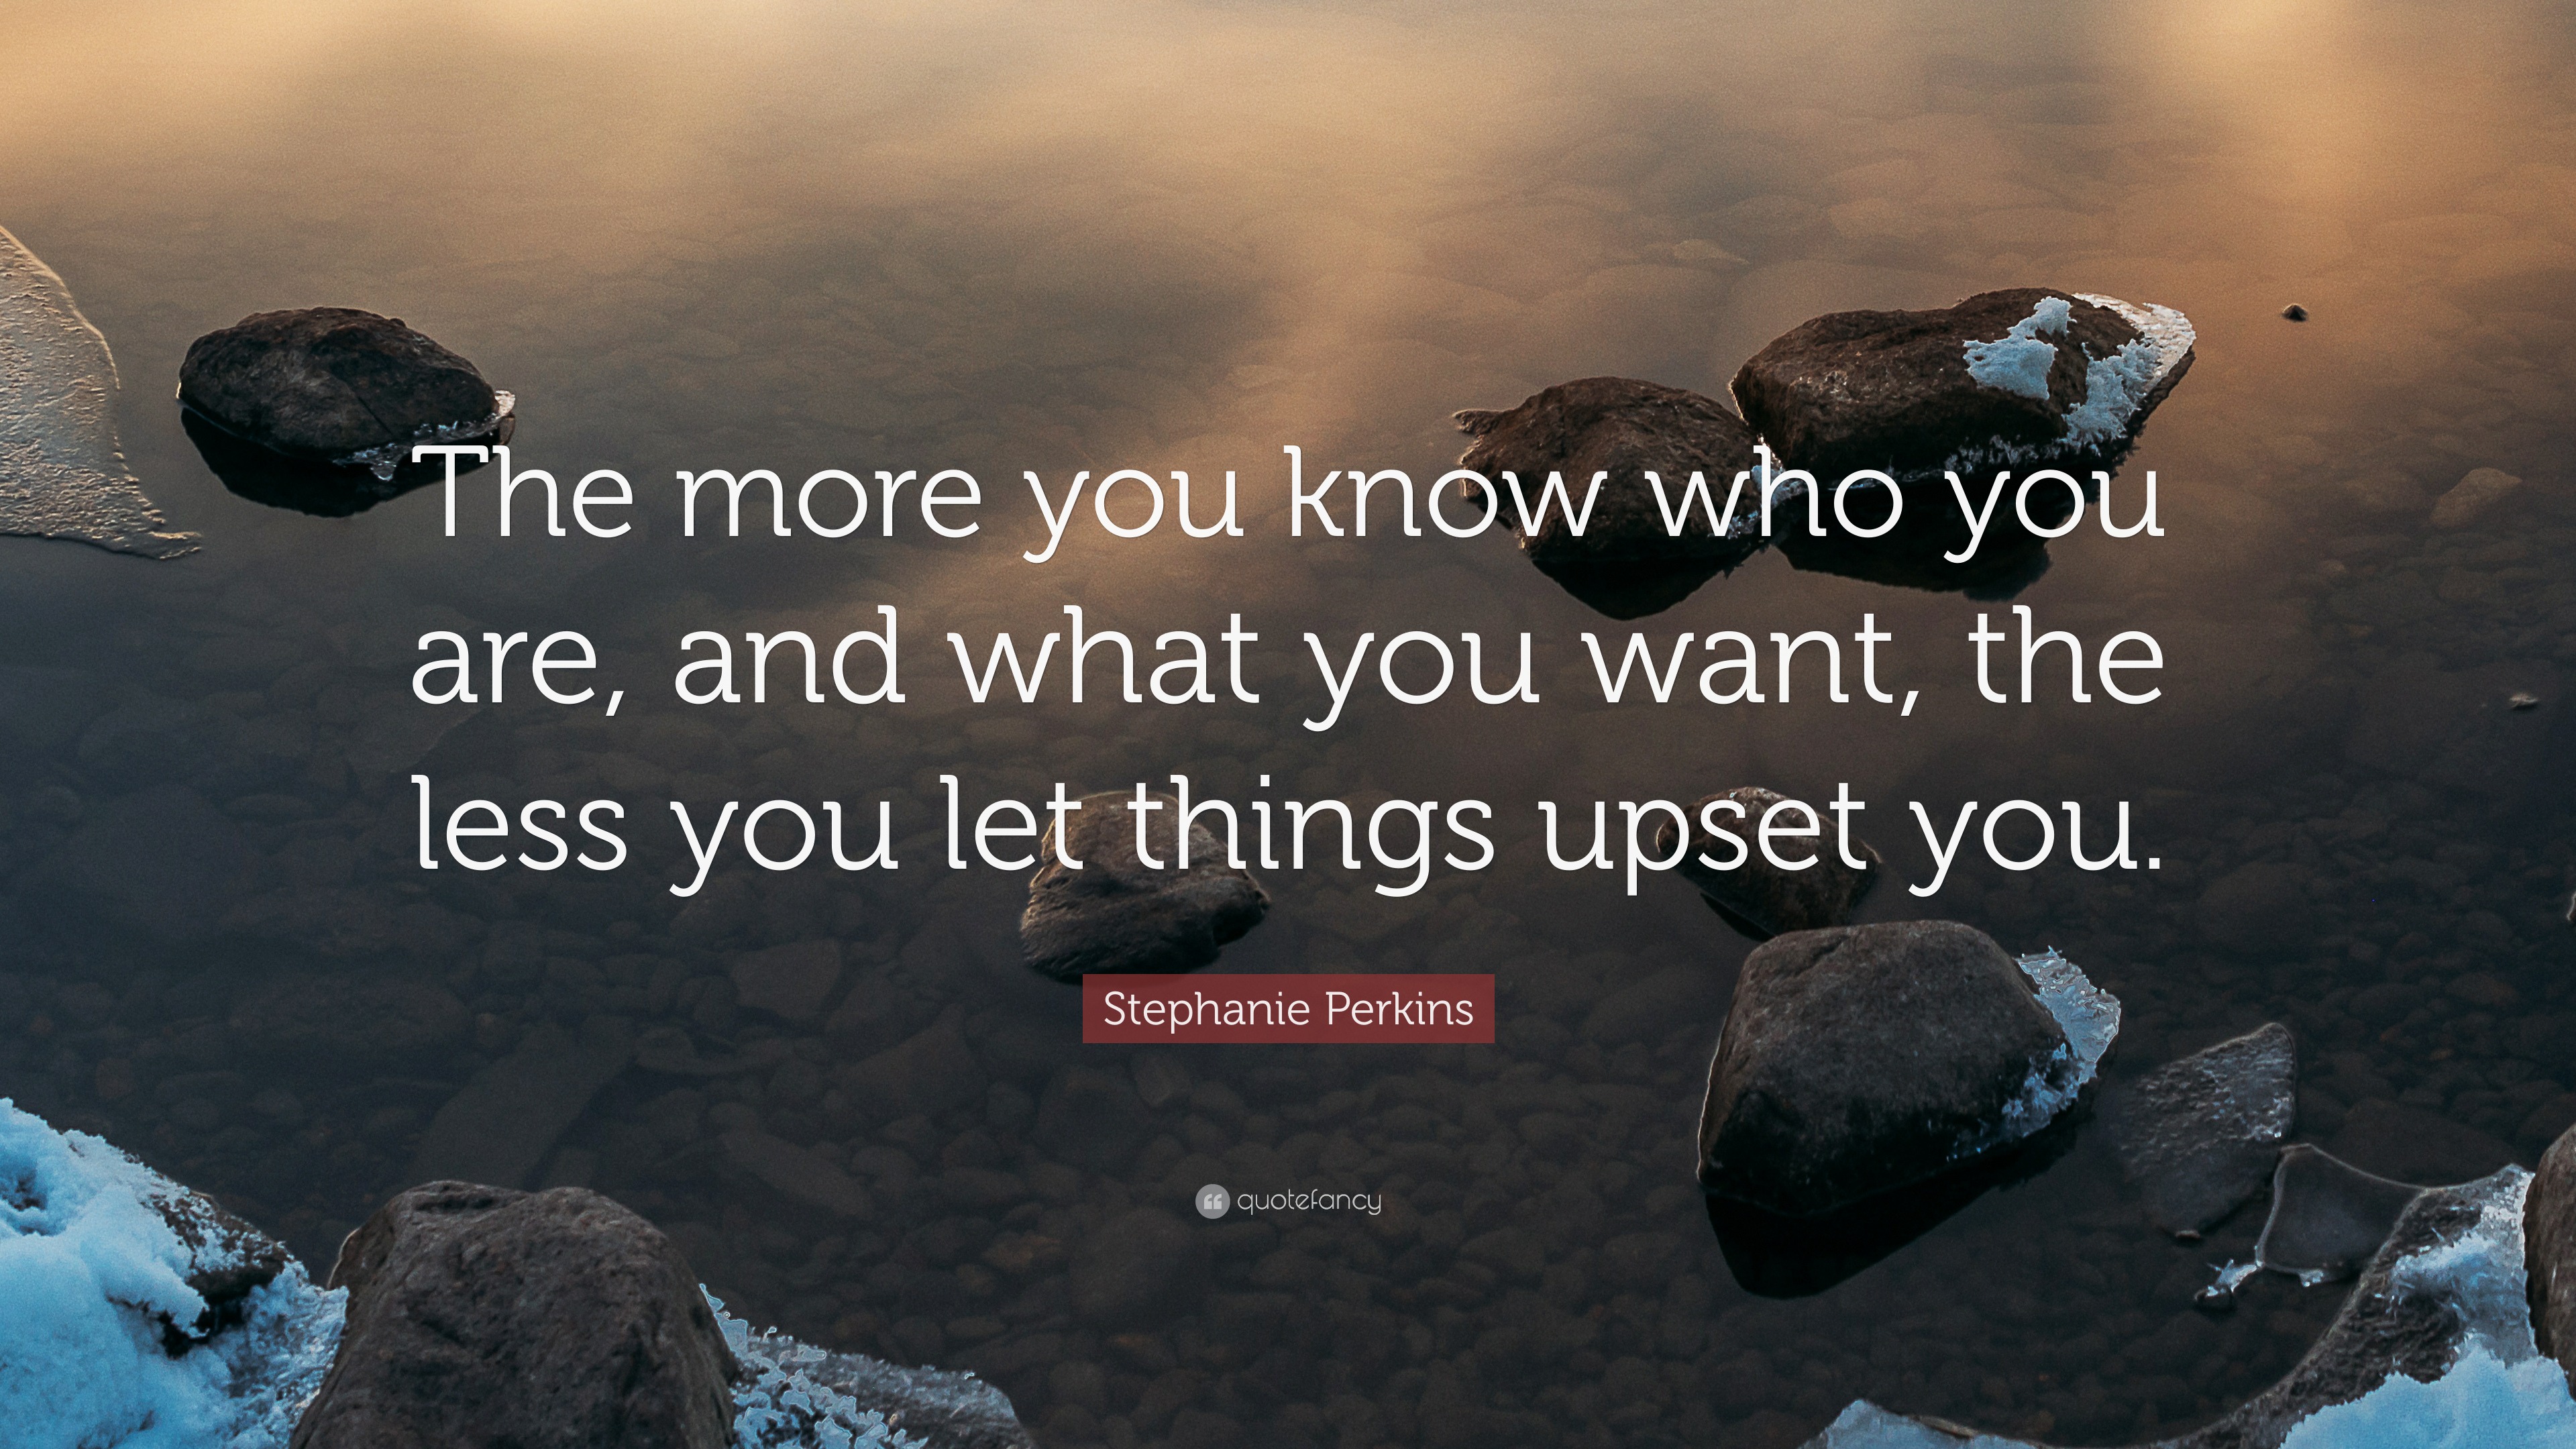 Stephanie Perkins Quote: “The more you know who you are, and what you ...